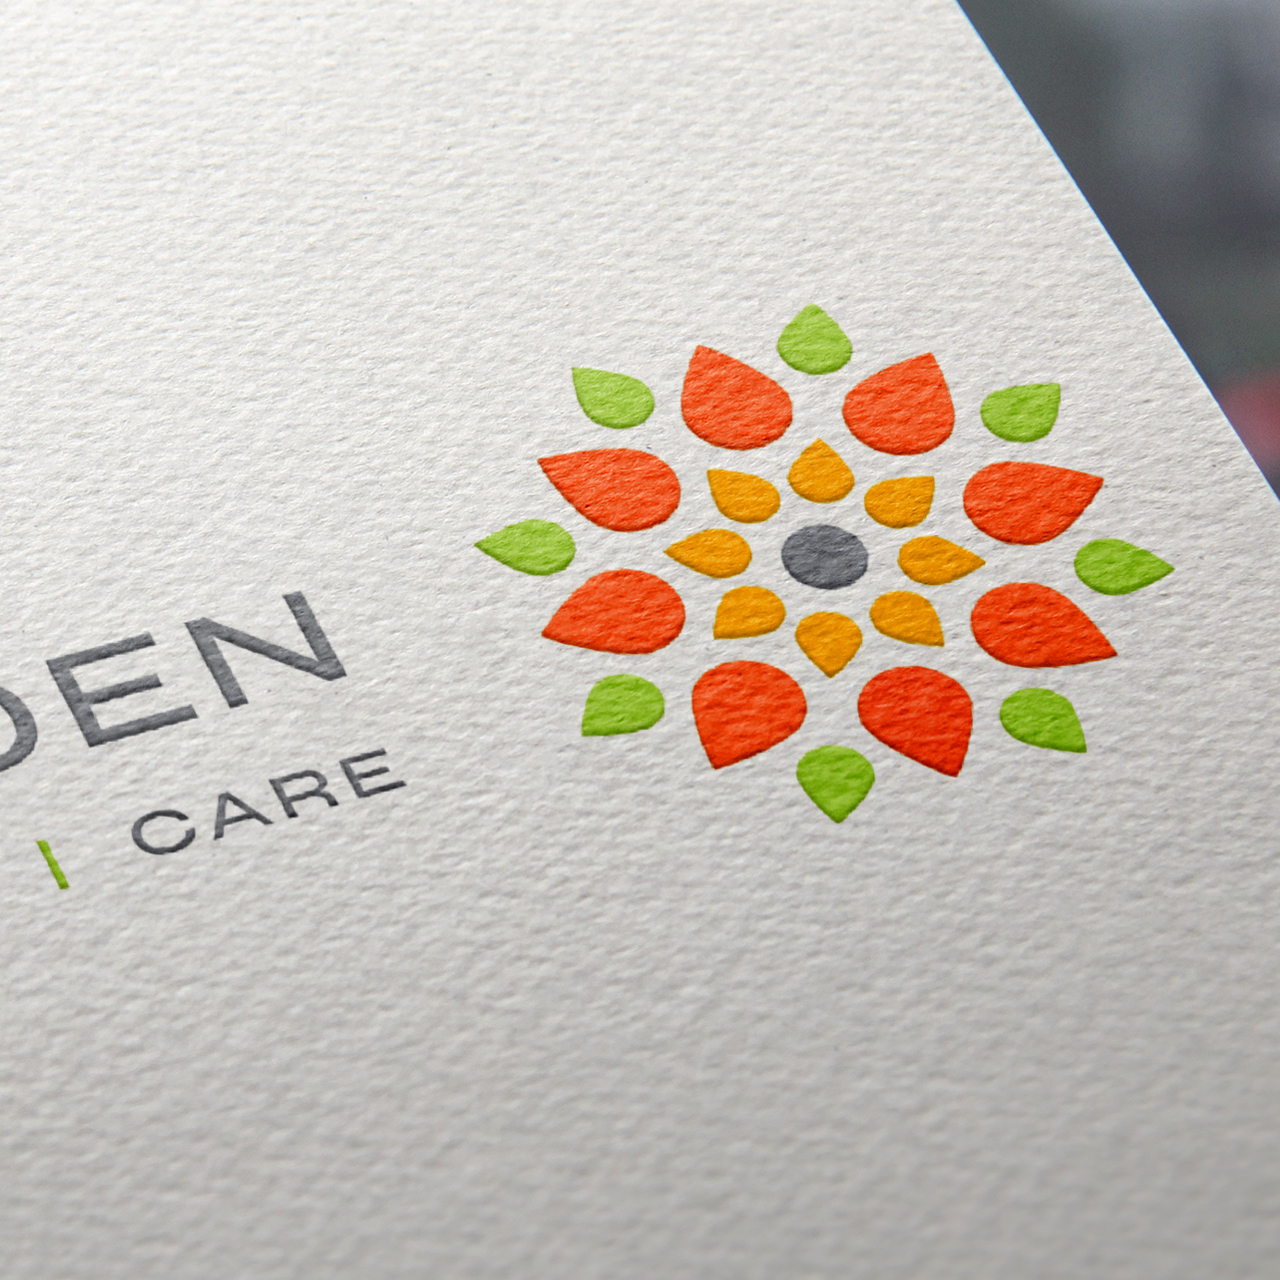 A close-up image of the Outside Garden logo printed on letterhead